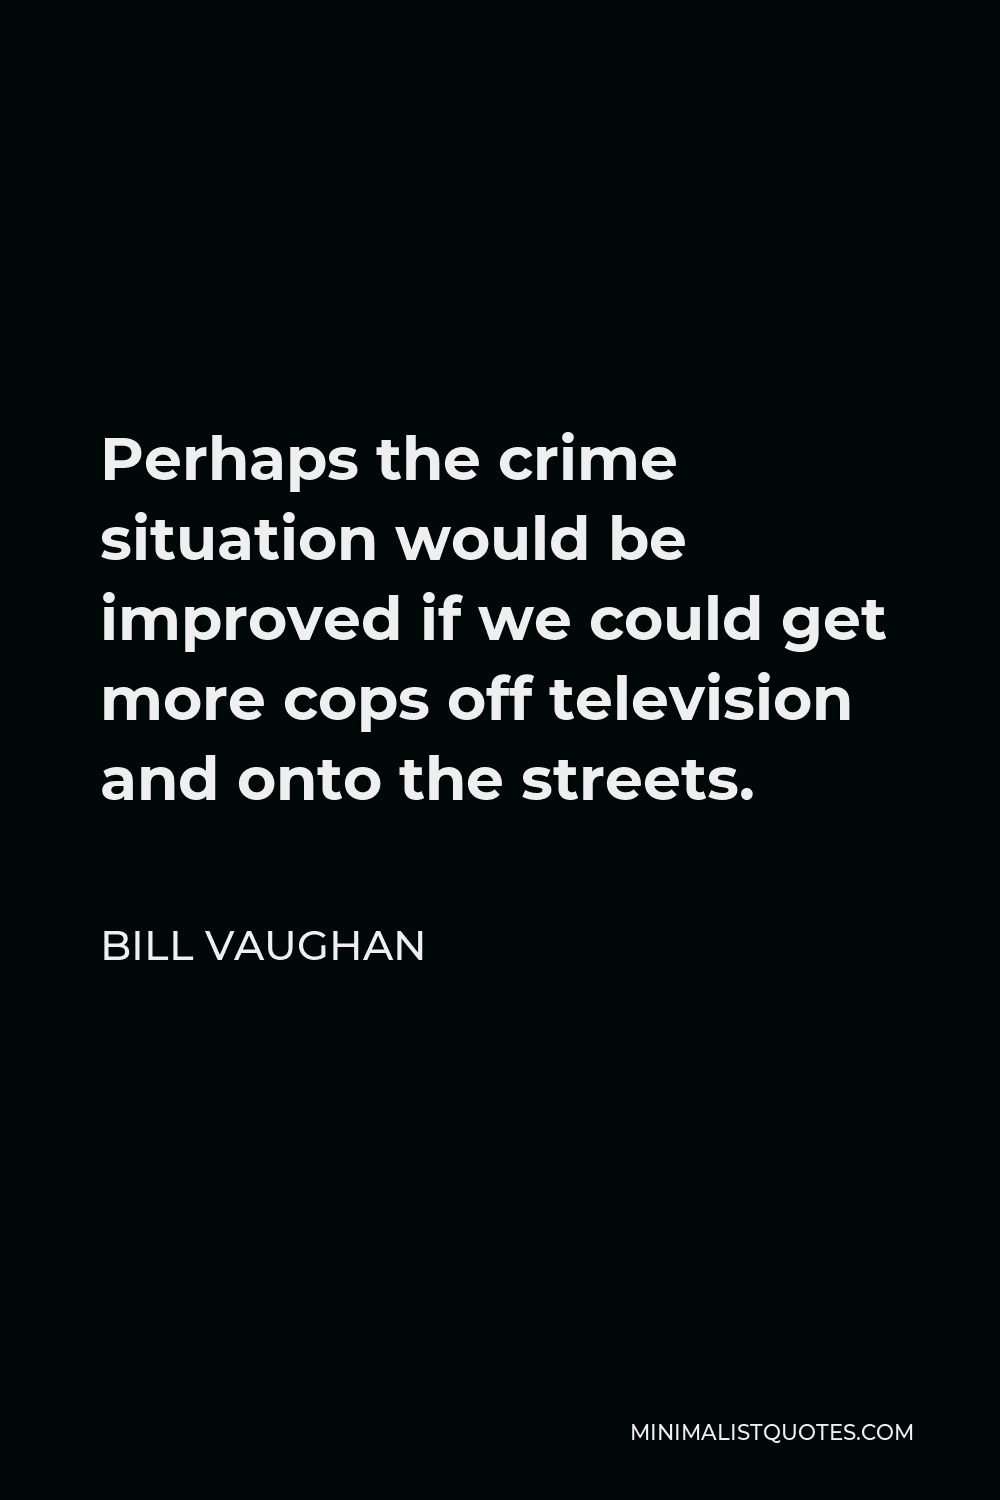 Bill Vaughan Quote - Perhaps the crime situation would be improved if we could get more cops off television and onto the streets.